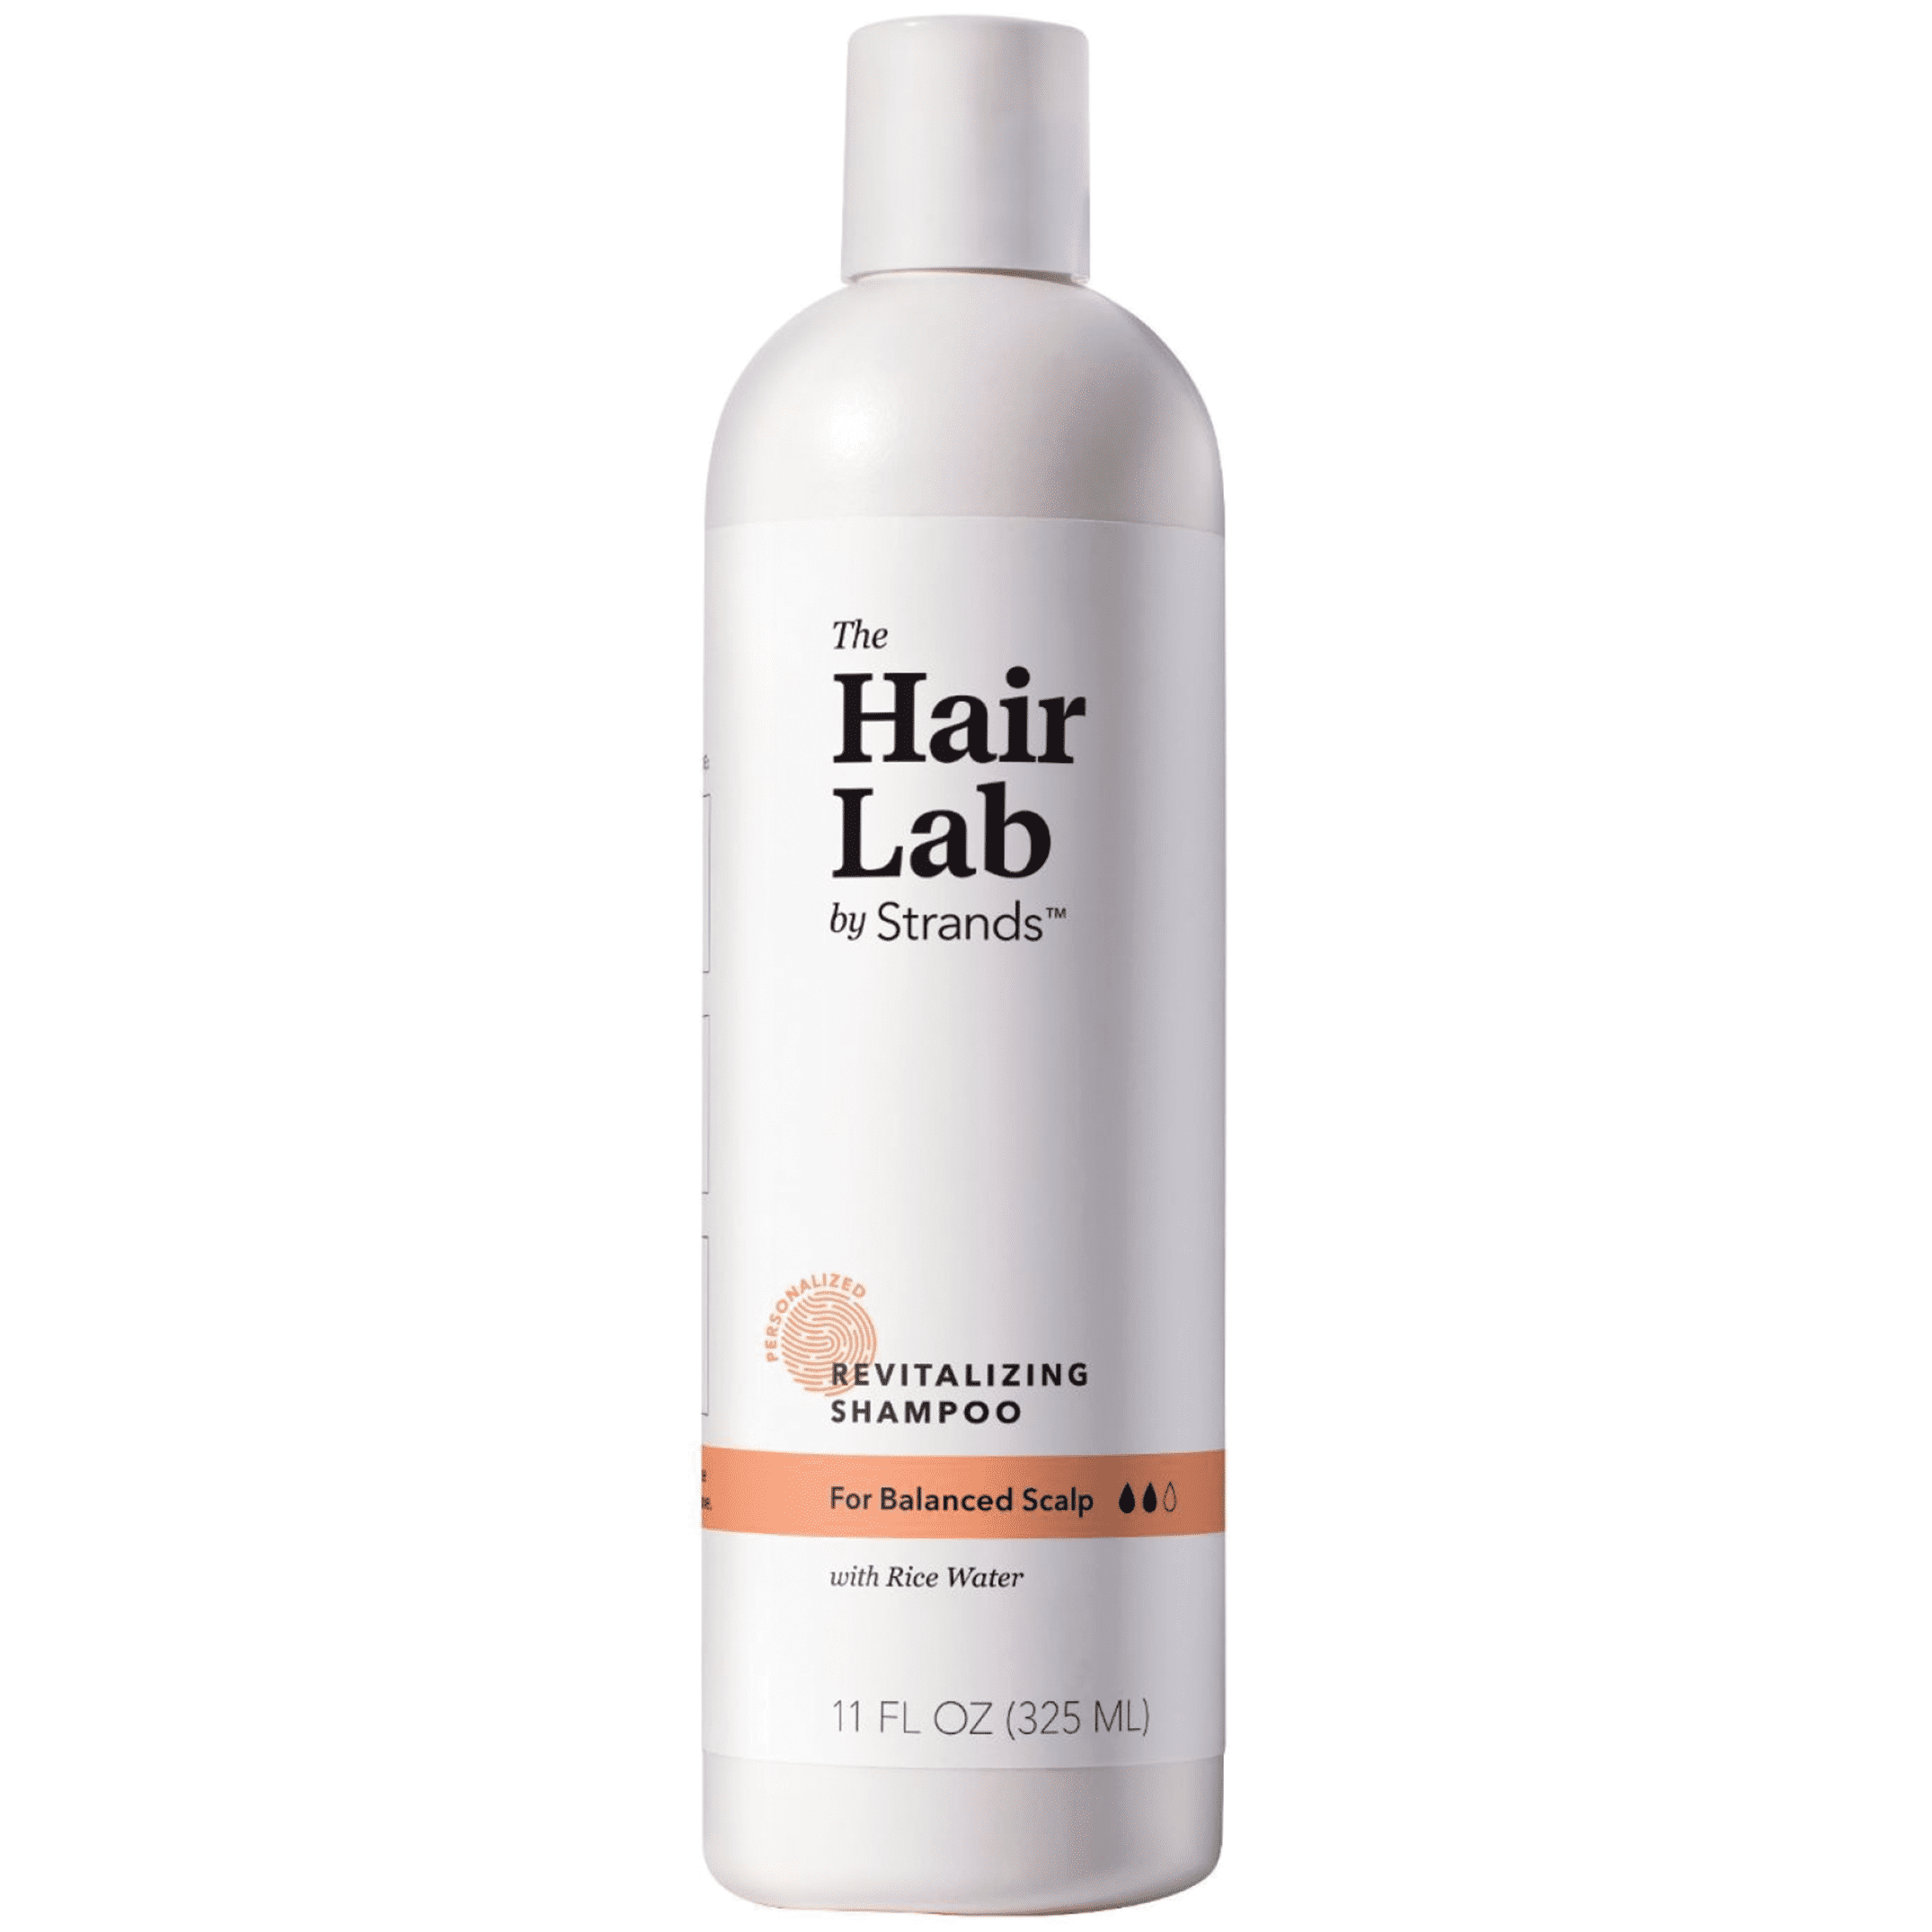 The Hair Lab Revitalizing Shampoo with Rice Water for Balanced Scalp, Sulfate & Paraben Free, 11 oz. - image 1 of 9